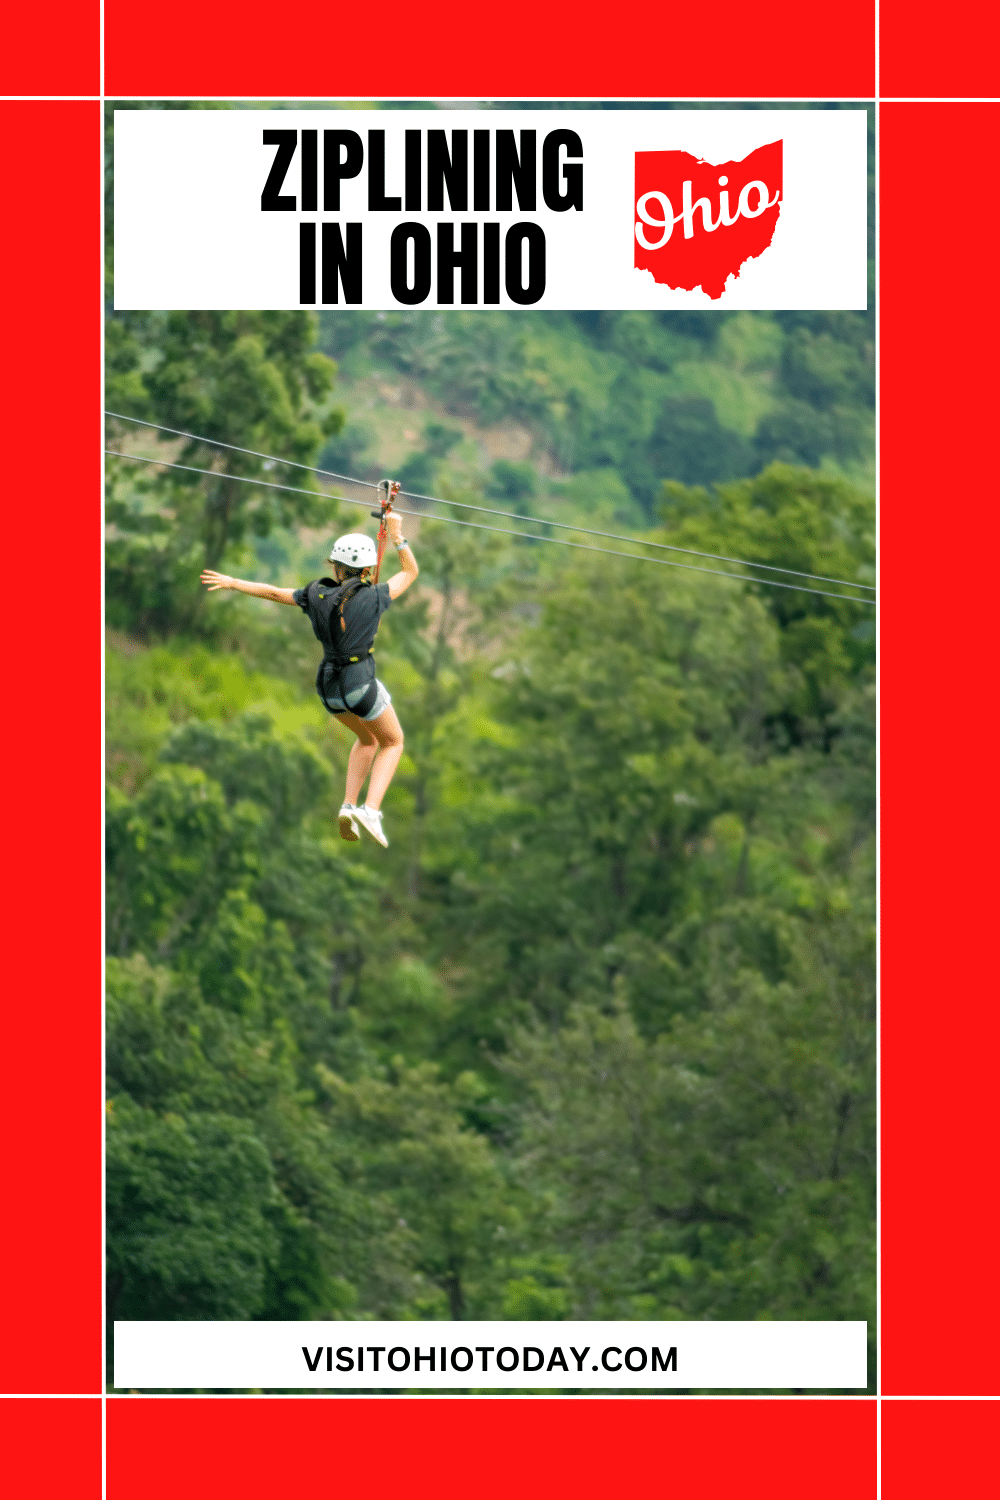 Experience the thrill of ziplining in Ohio! Whether you're an adrenaline junkie or a nature lover, ziplining offers an unforgettable adventure for everyone. Discover the beauty of Ohio's landscapes from above as you soar through the treetops. With multiple locations across Ohio, you can find the perfect ziplining tour for your family. Don't miss the chance to try a nighttime tour under the magical moonlight!